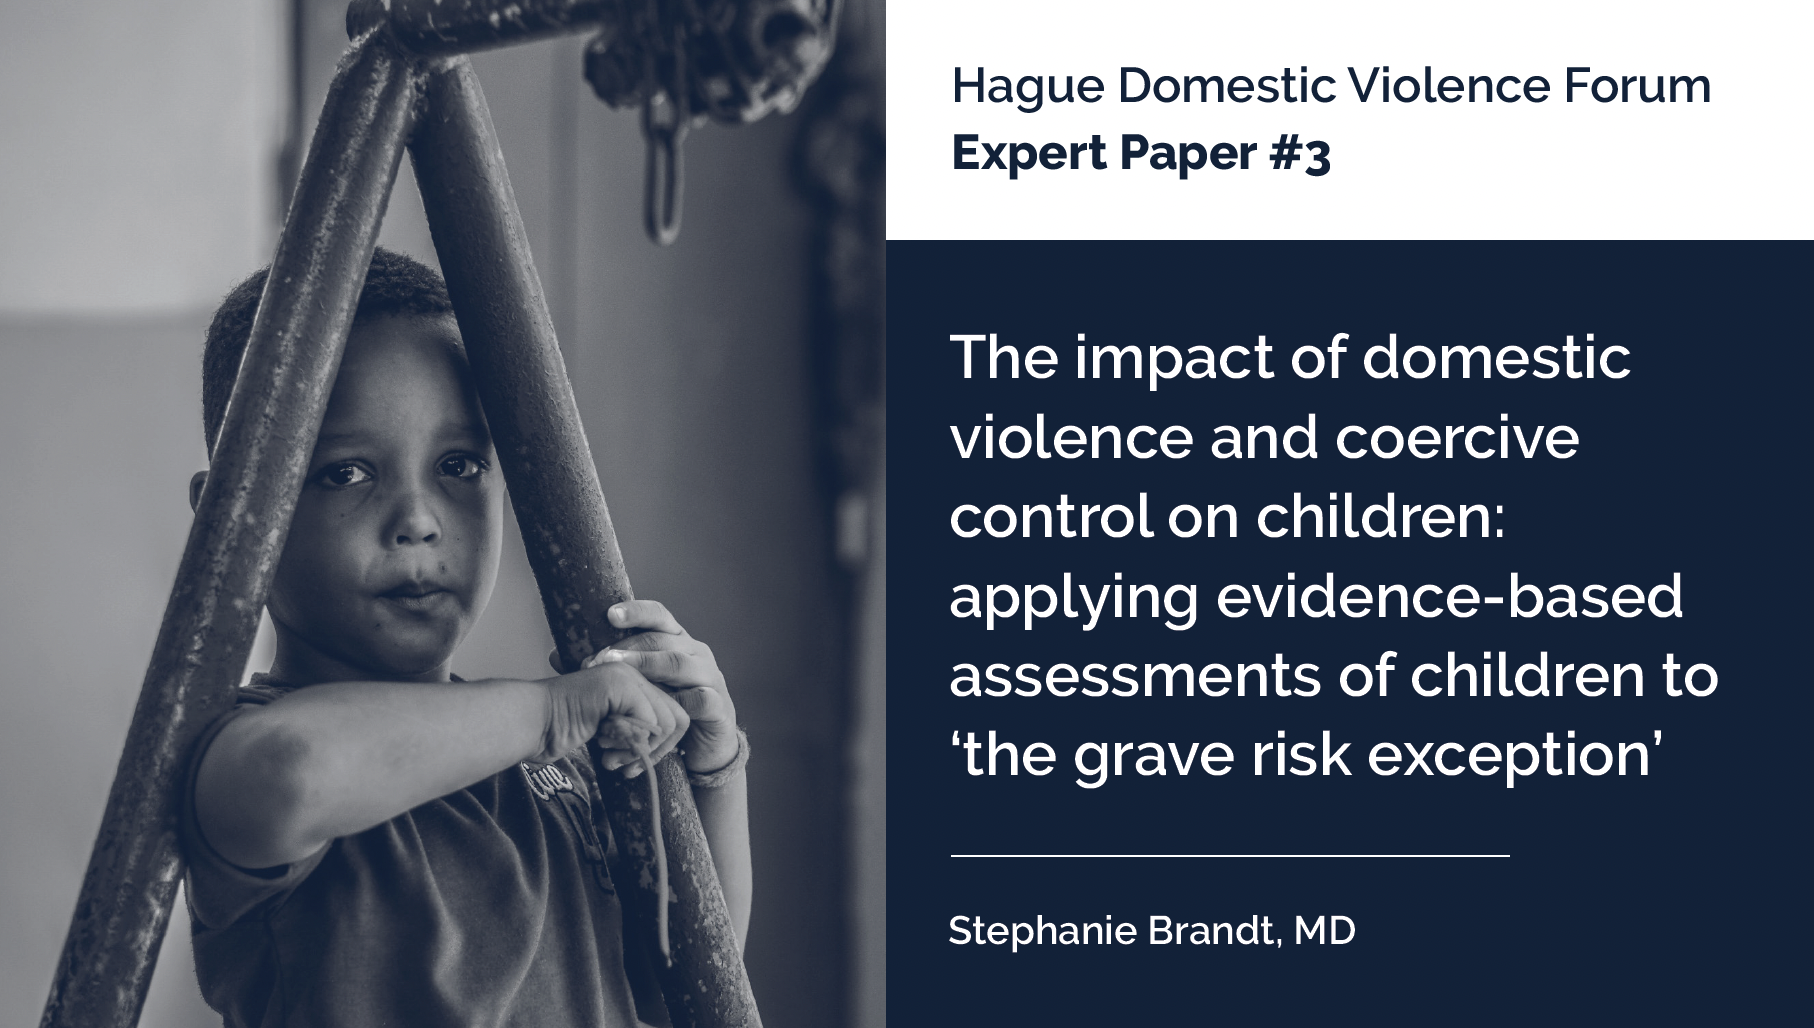 Expert Paper 3: The impact of domestic violence and coercive control on children: applying evidence-based assessments of children to ‘the grave risk exception’